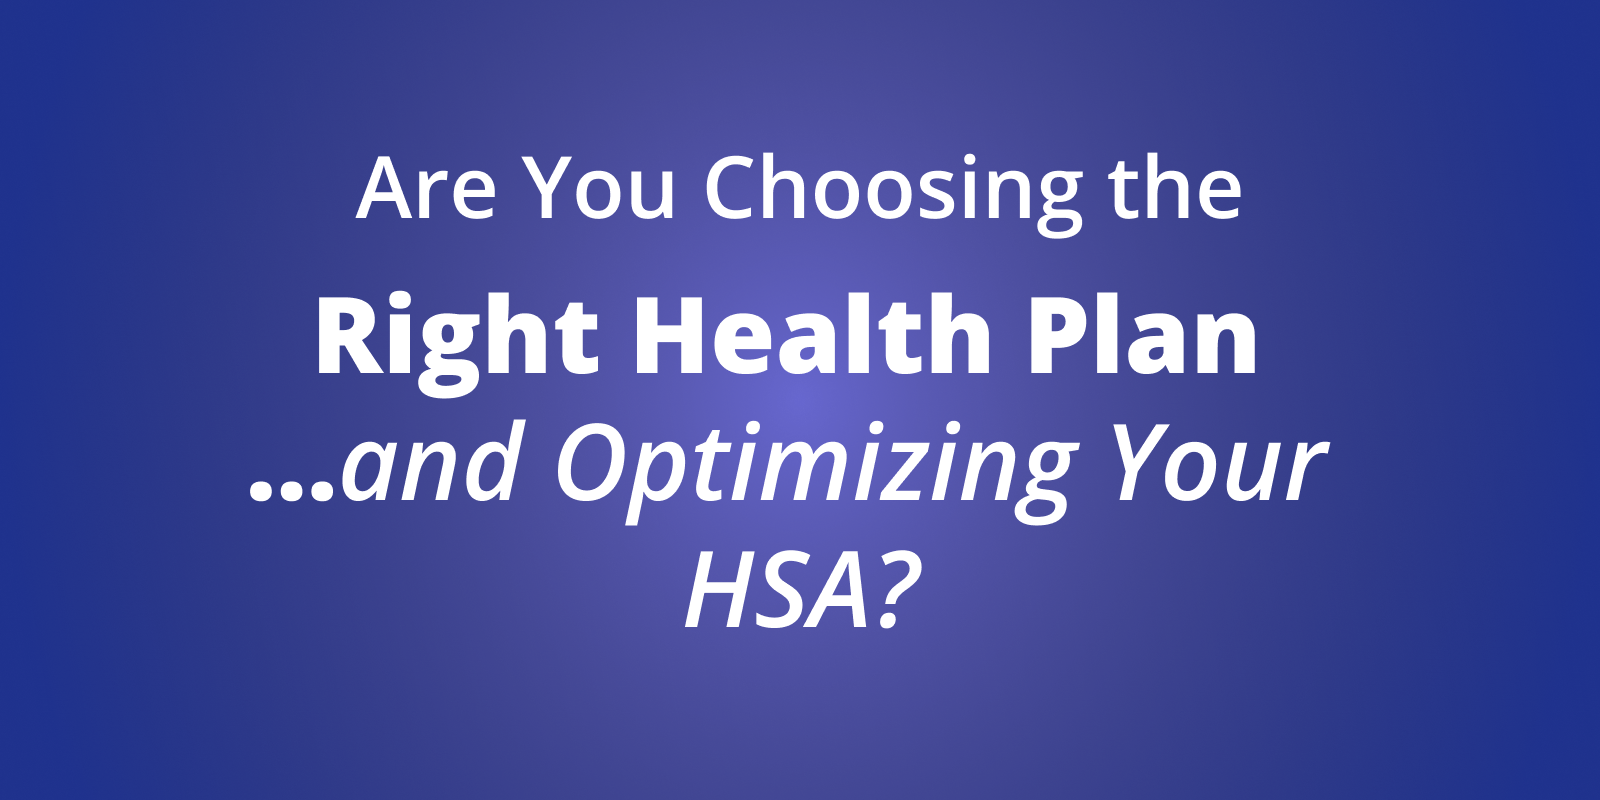 Are You Choosing the Right Health Plan…and Optimizing Your HSA?